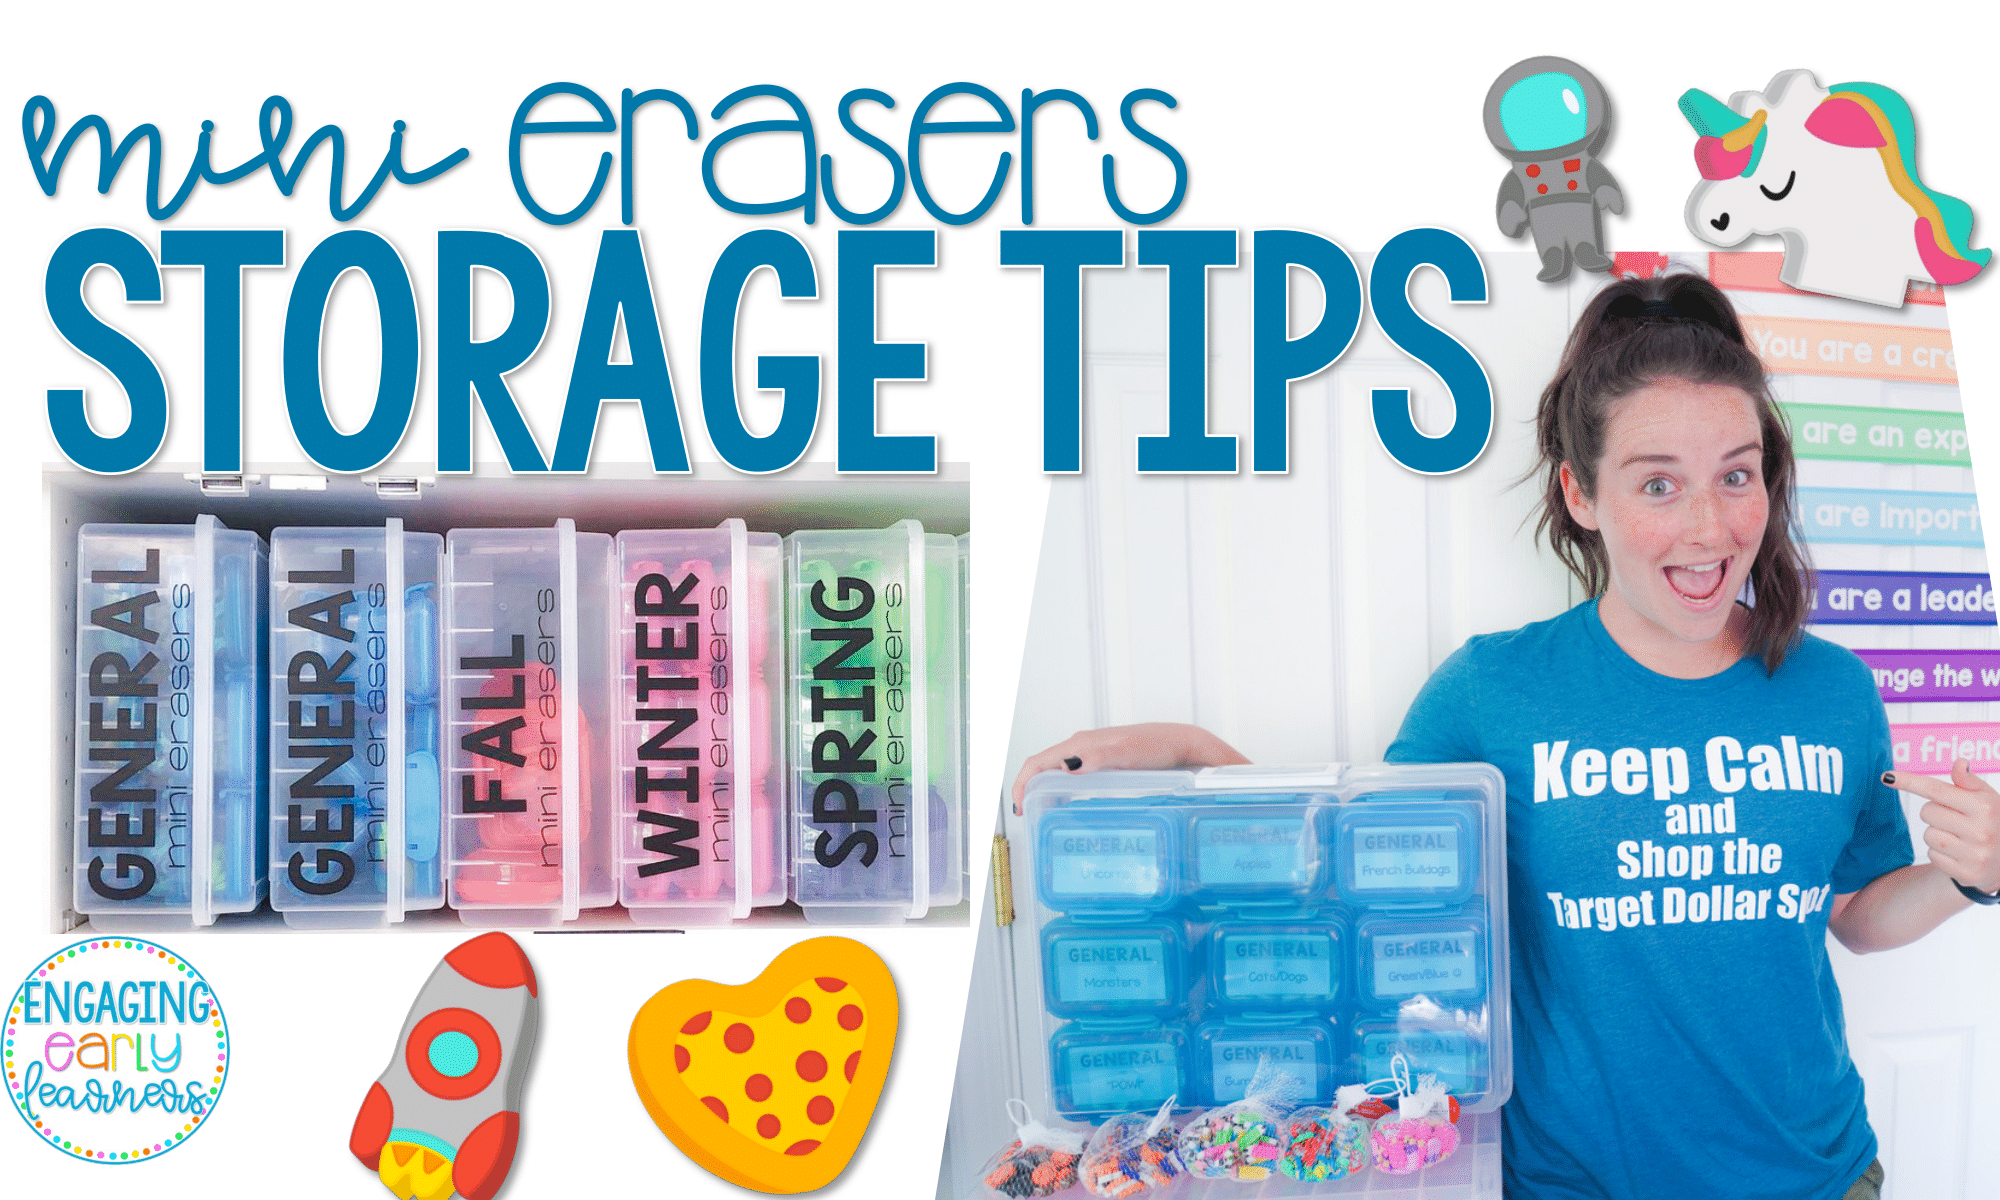 Mini Eraser Storage Tips for the Classroom - Engaging Early Learners